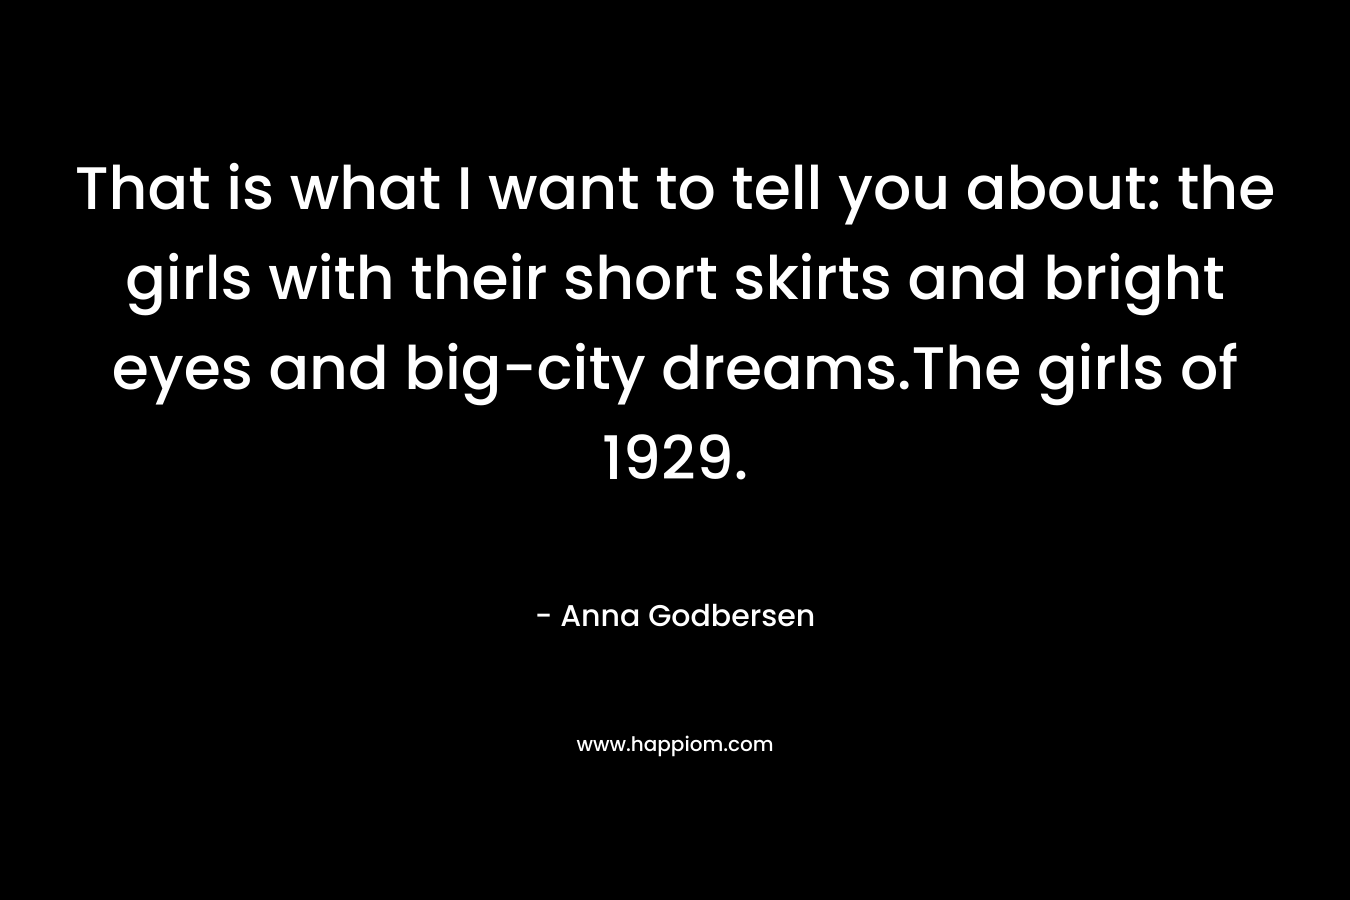 That is what I want to tell you about: the girls with their short skirts and bright eyes and big-city dreams.The girls of 1929.